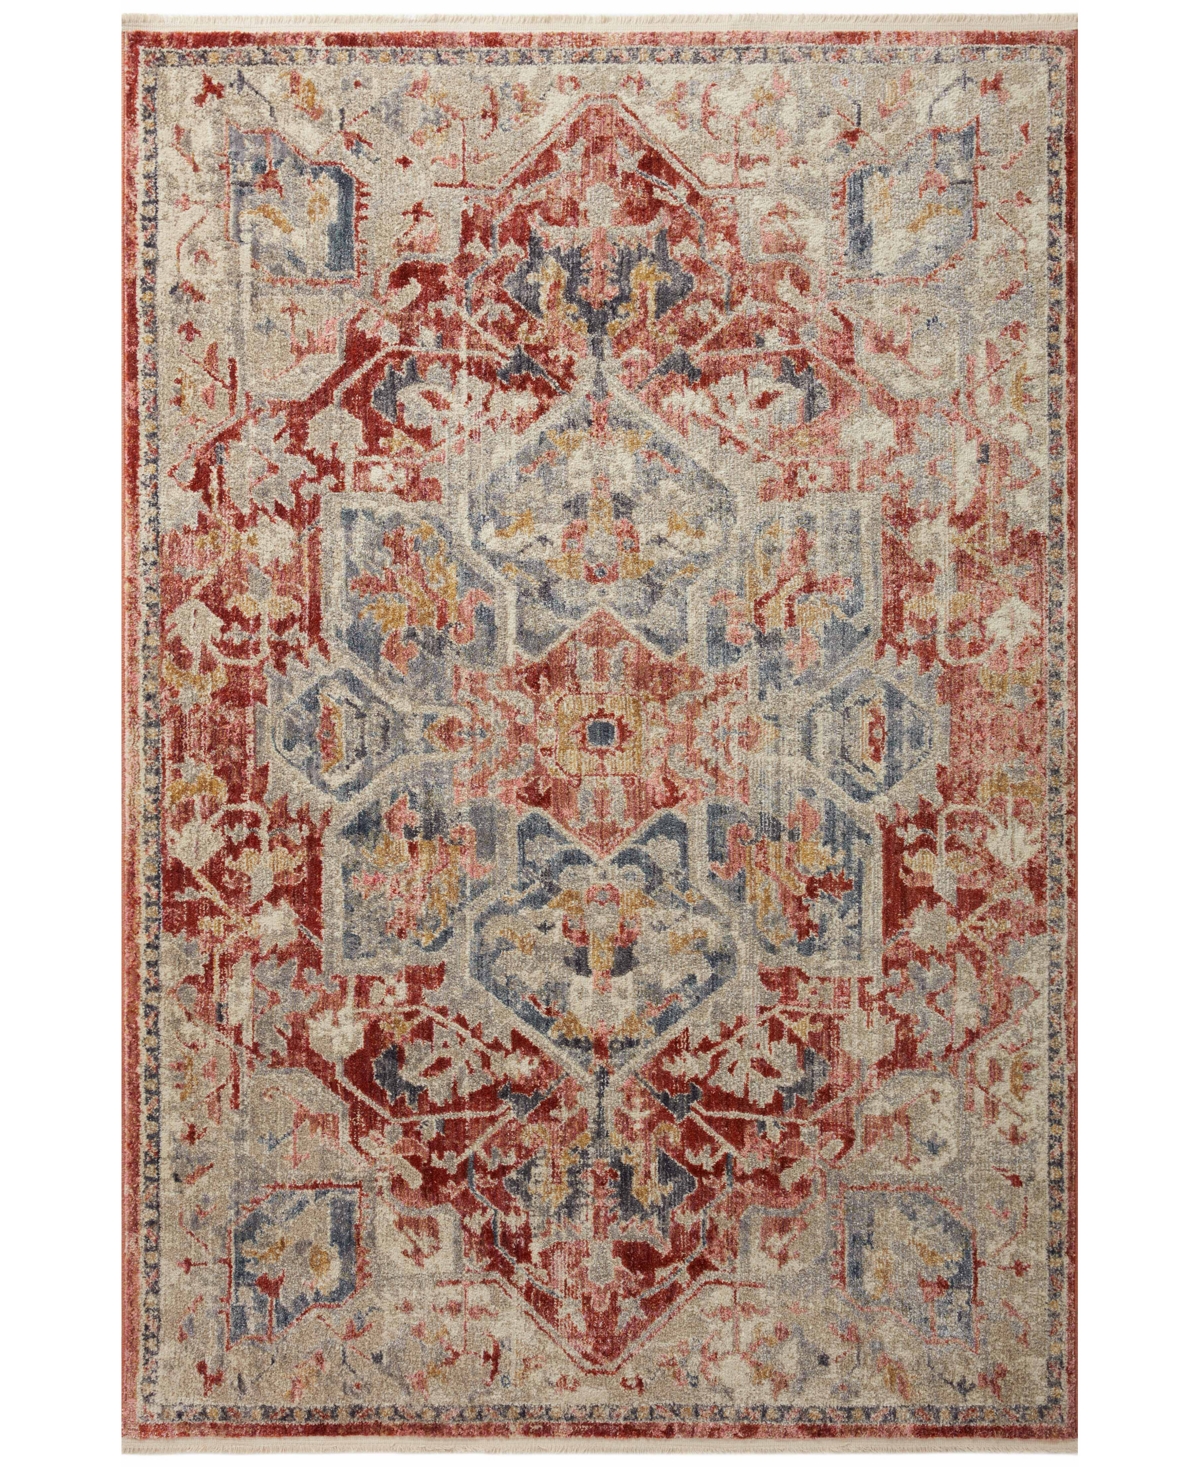 Magnolia Home By Joanna Gaines X Loloi Janey Jay-01 7'10" X 10'10" Area Rug In Maroon